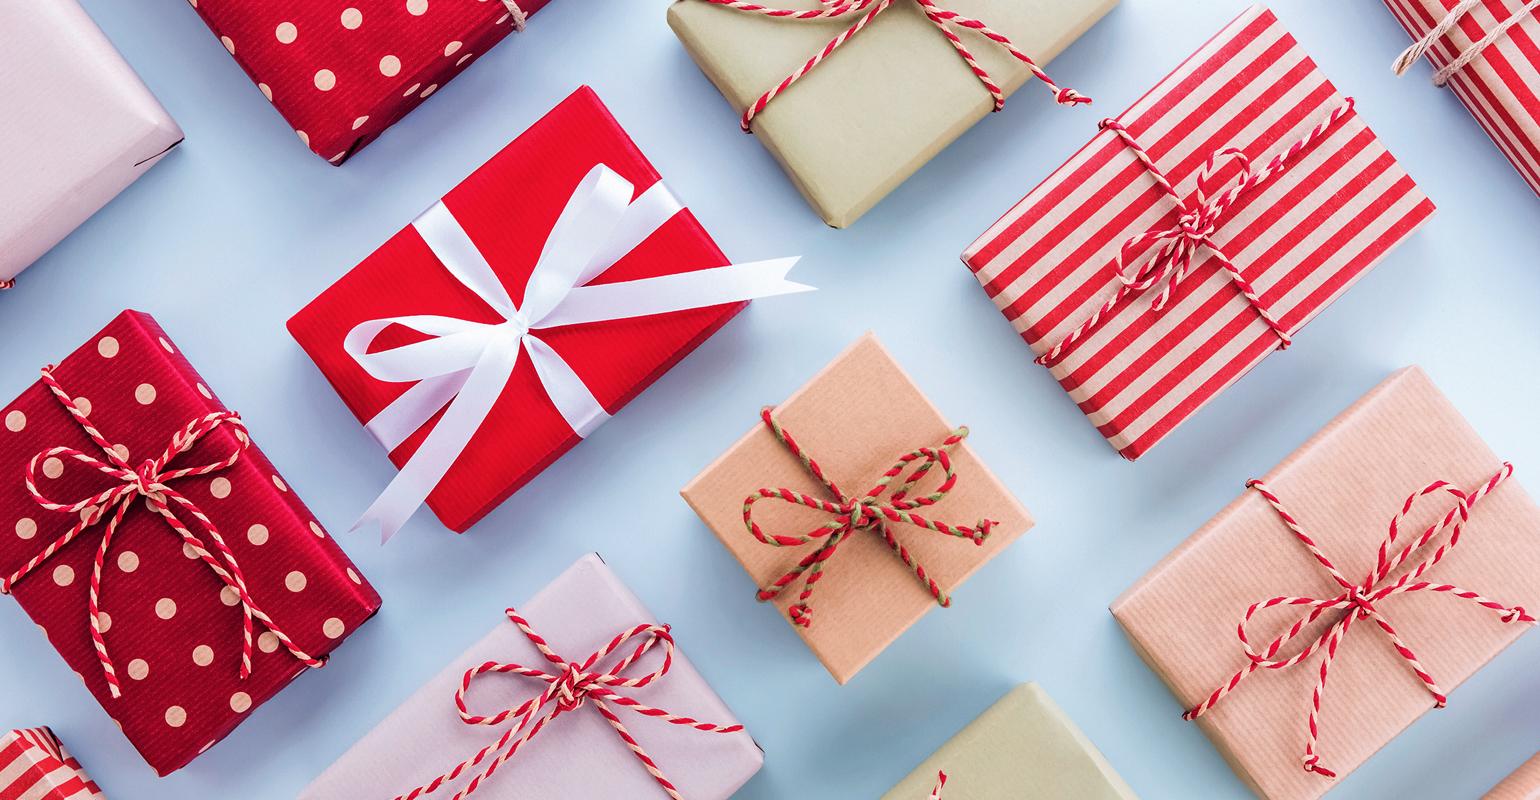 2018 Holiday Gift Guide, Great Gifts for Clients, Speakers, Coworkers